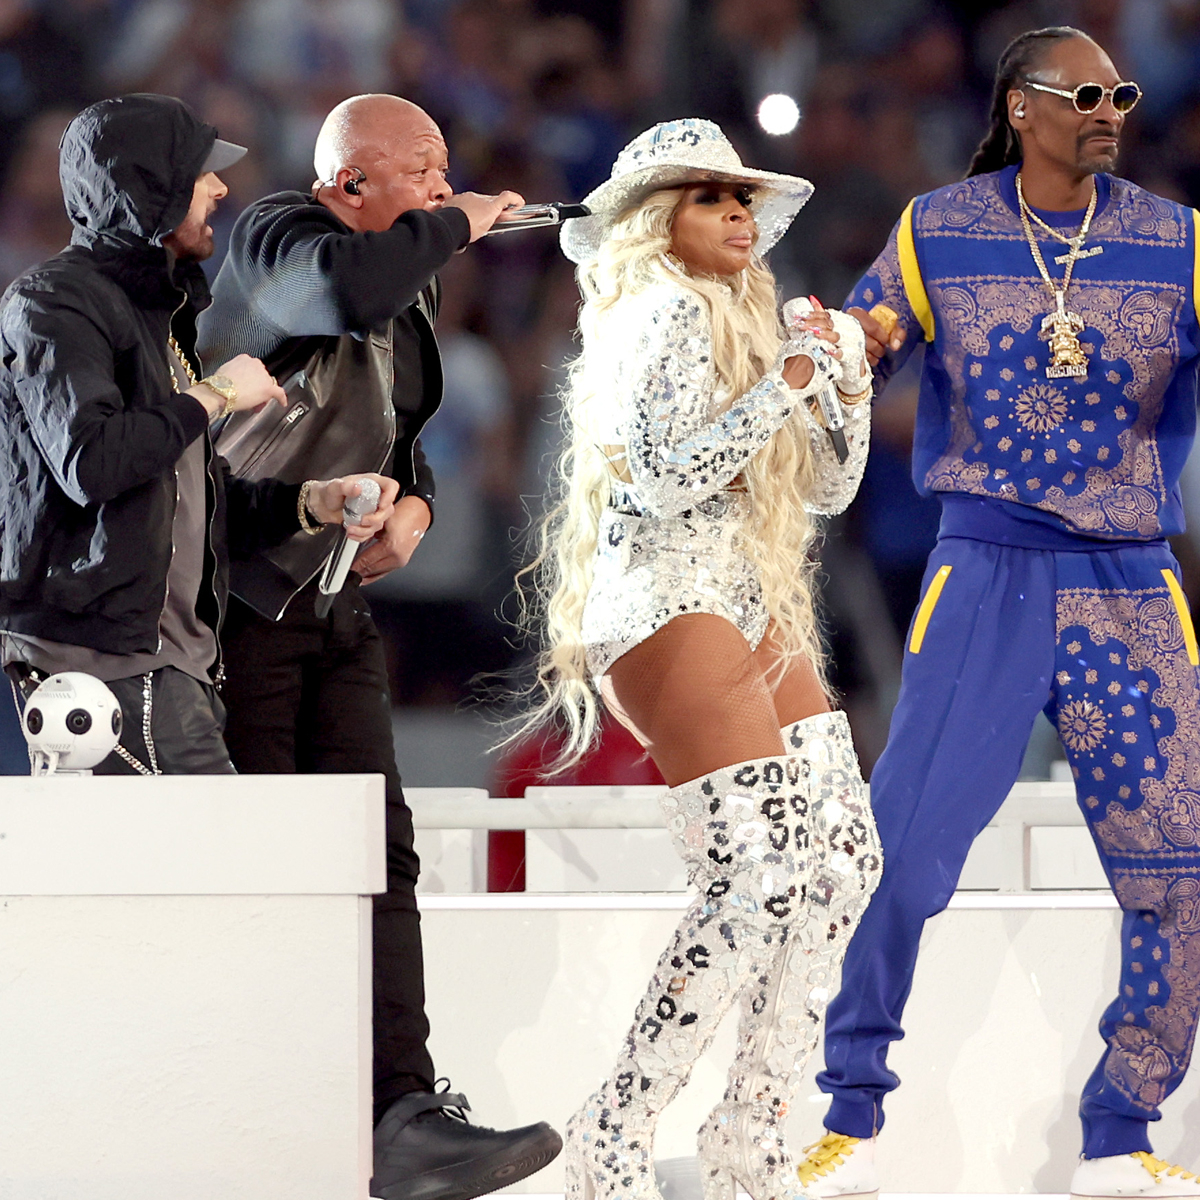 From Snoop Dogg to Kendrick Lamar, Top Fashion Moments from Super Bowl 2022  - News18